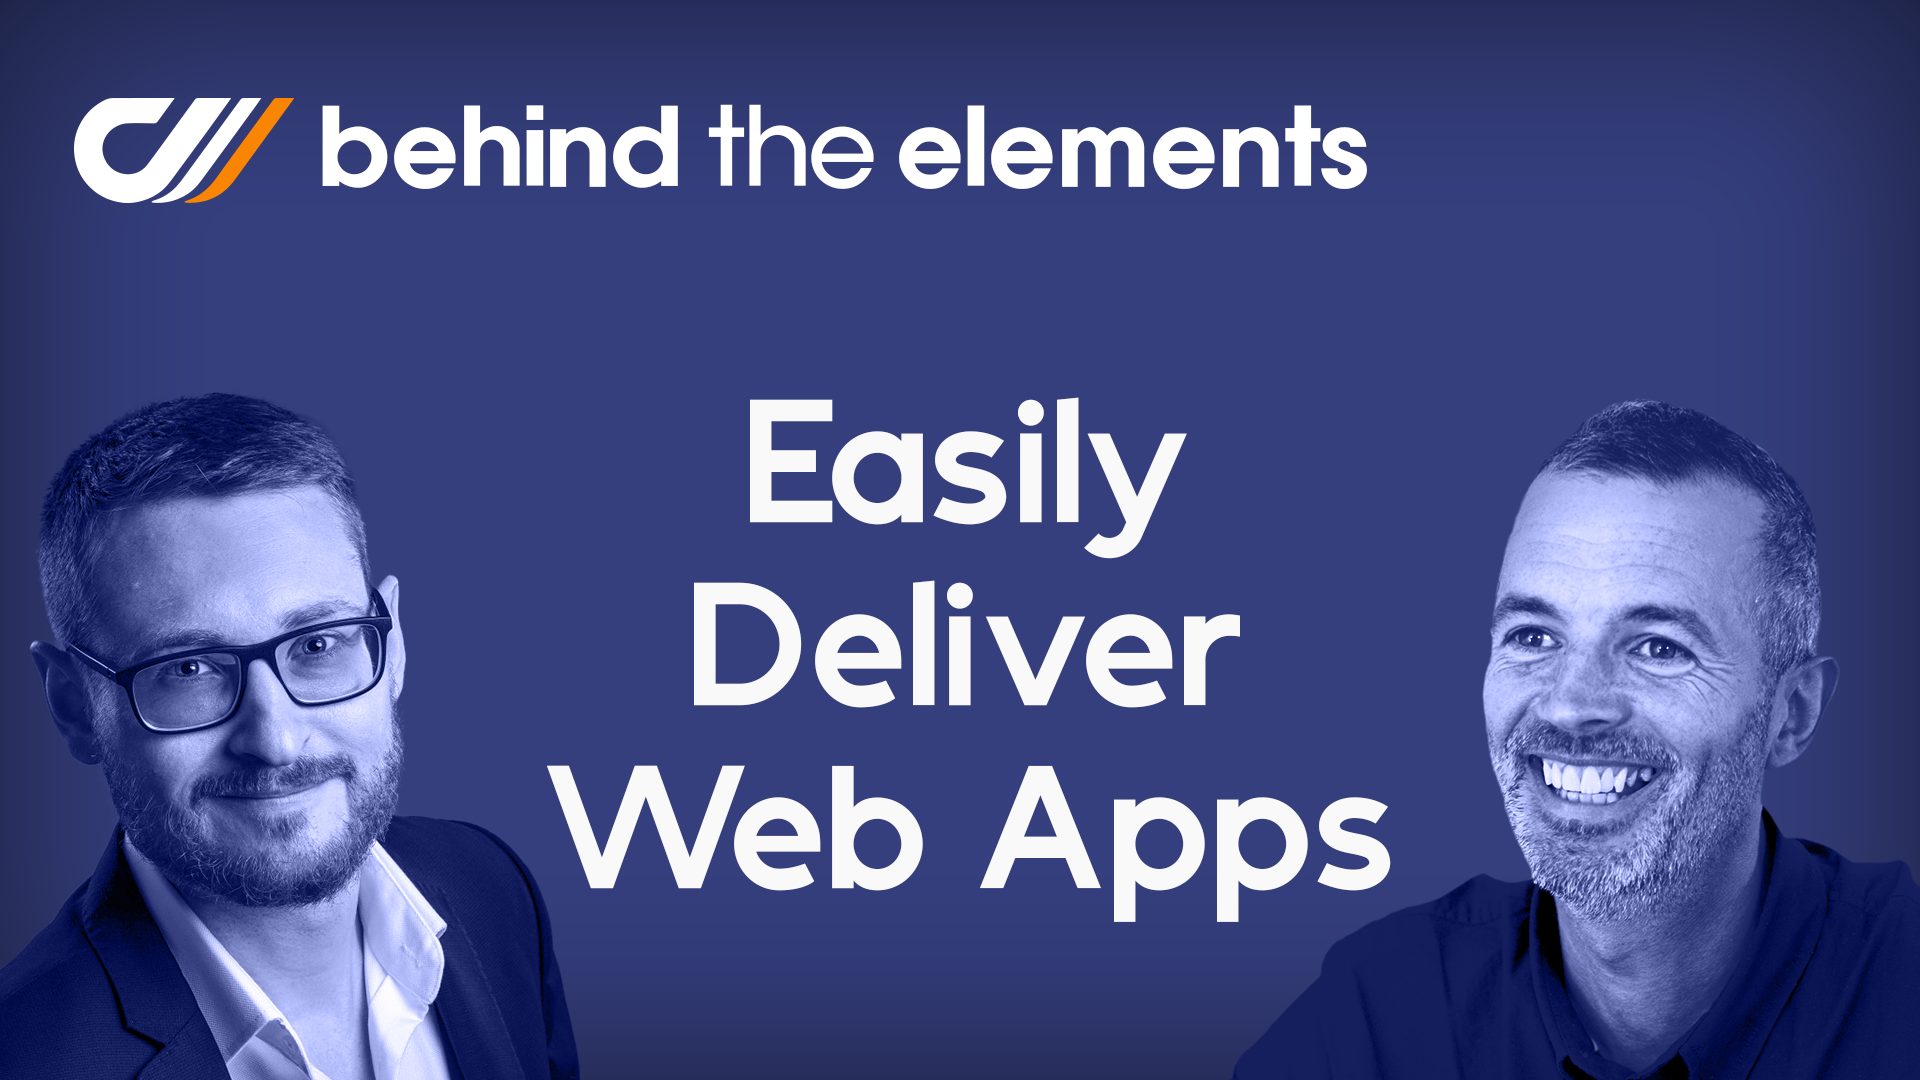 Web Apps: Easily Deliver Web Applications